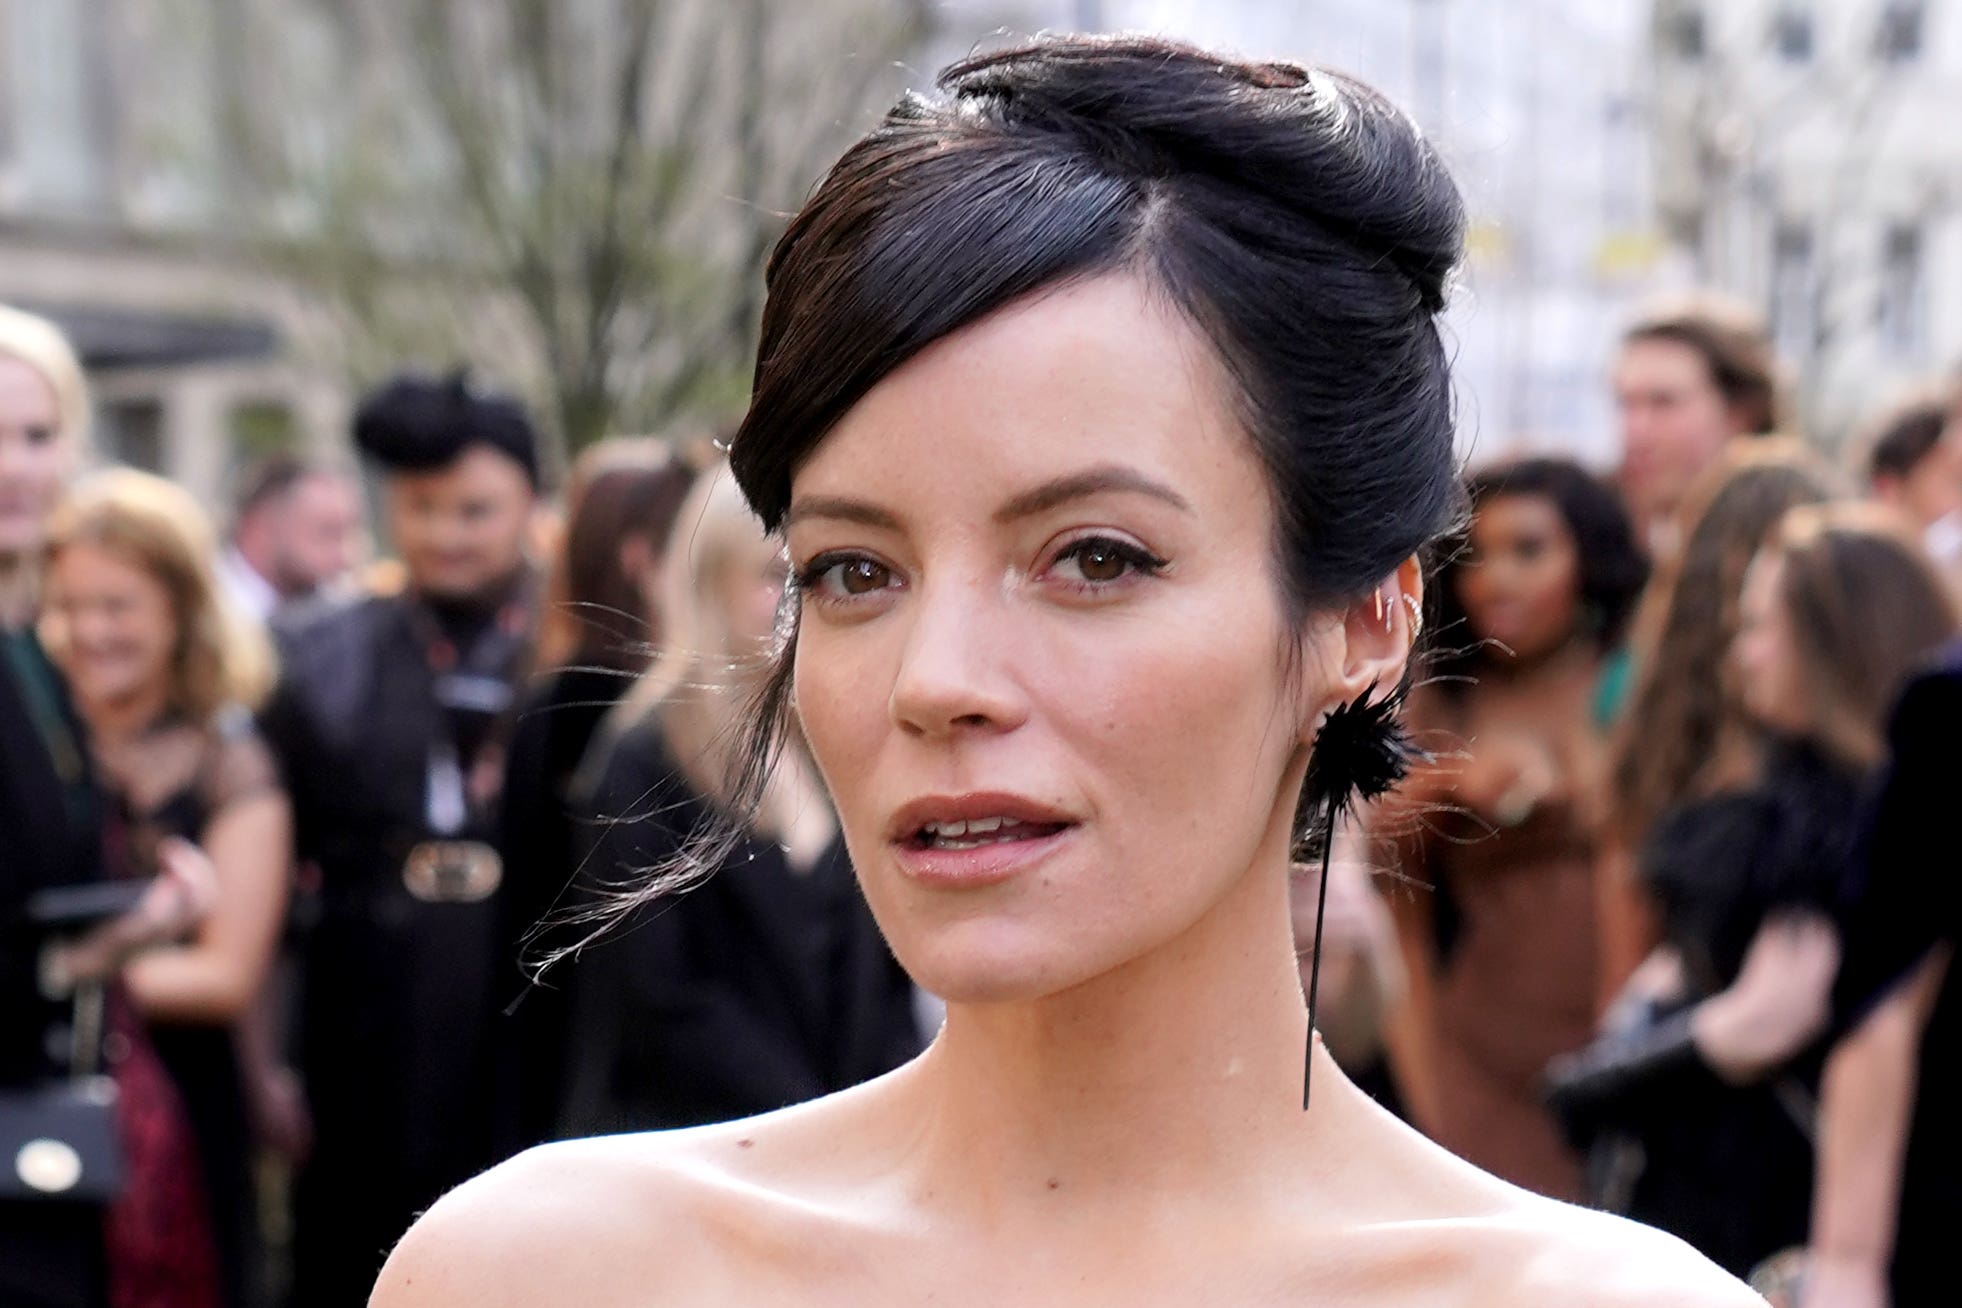 Lily Allen pictured attending the Laurence Olivier Awards at the Royal Albert Hall, London (Ian West/PA)